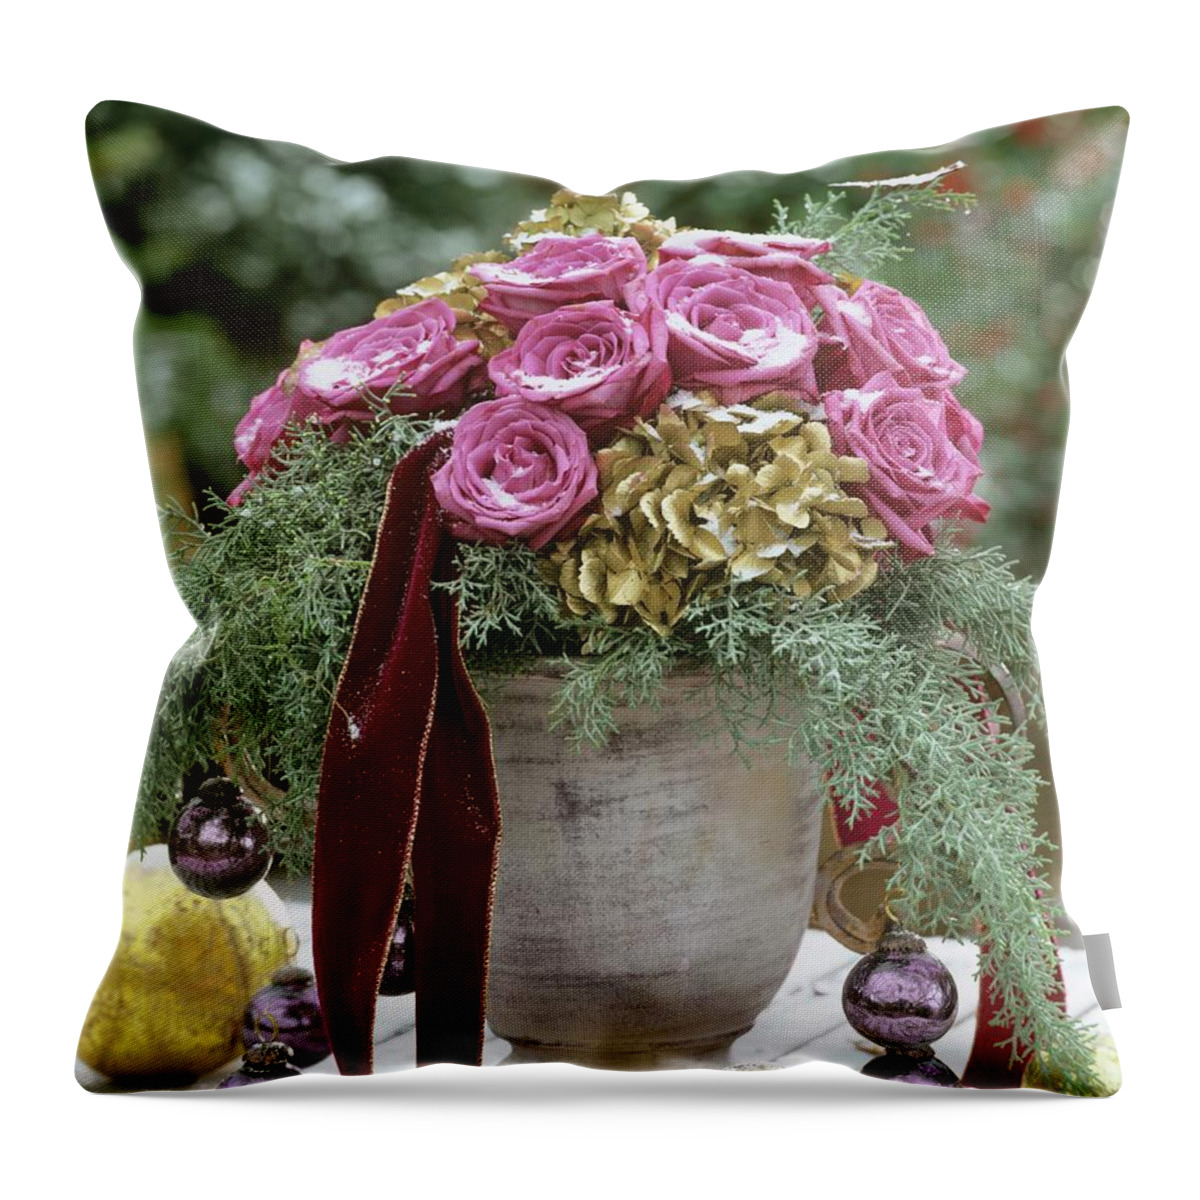 Ip_00271087 Throw Pillow featuring the photograph Christmassy Arrangement Of Roses by Friedrich Strauss